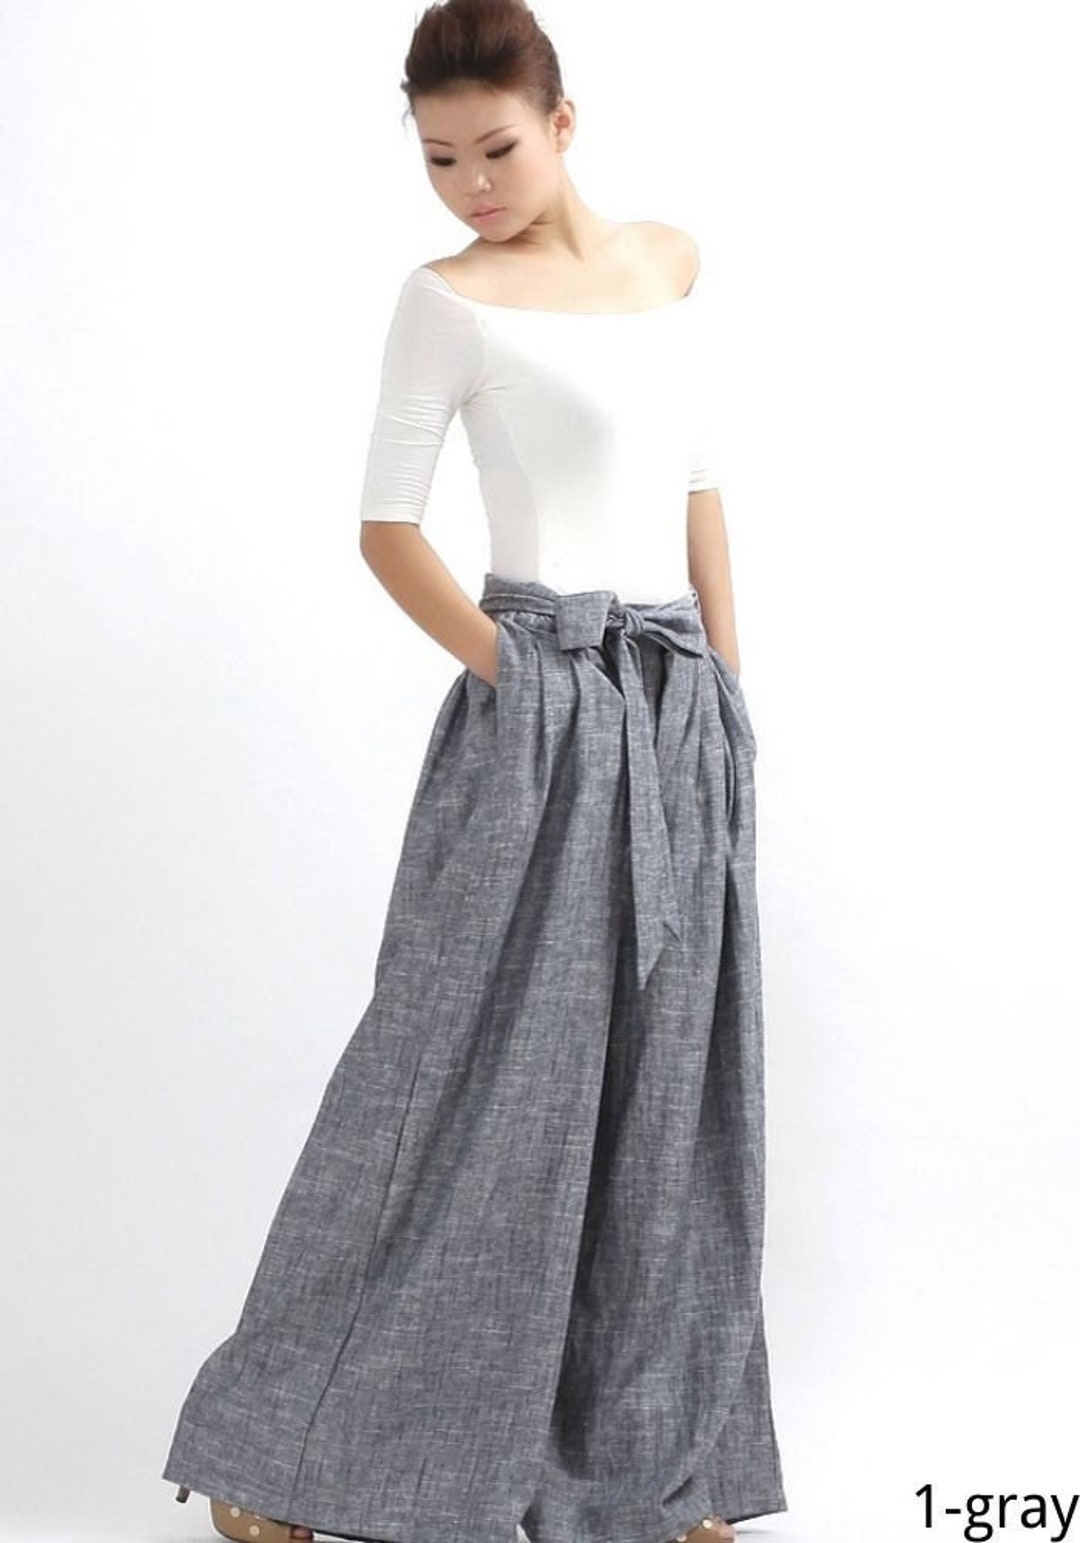 Women's Pleated High Waisted Wide Leg Pants, Belted Palazzo Trousers, Grey  Linen Pants, Long Linen Pants, Women Linen Pants, Xiaolizi 0308 